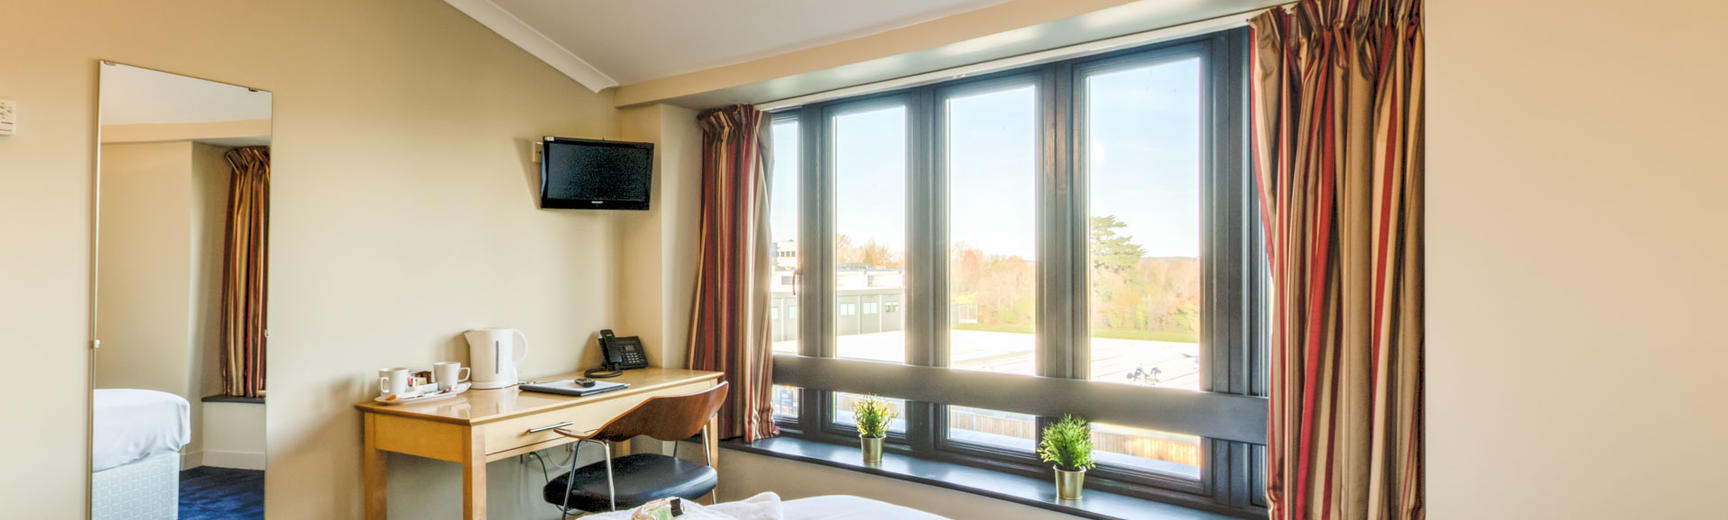 Photo of a hotel room with double bed, mirror, desk, TV and large windows